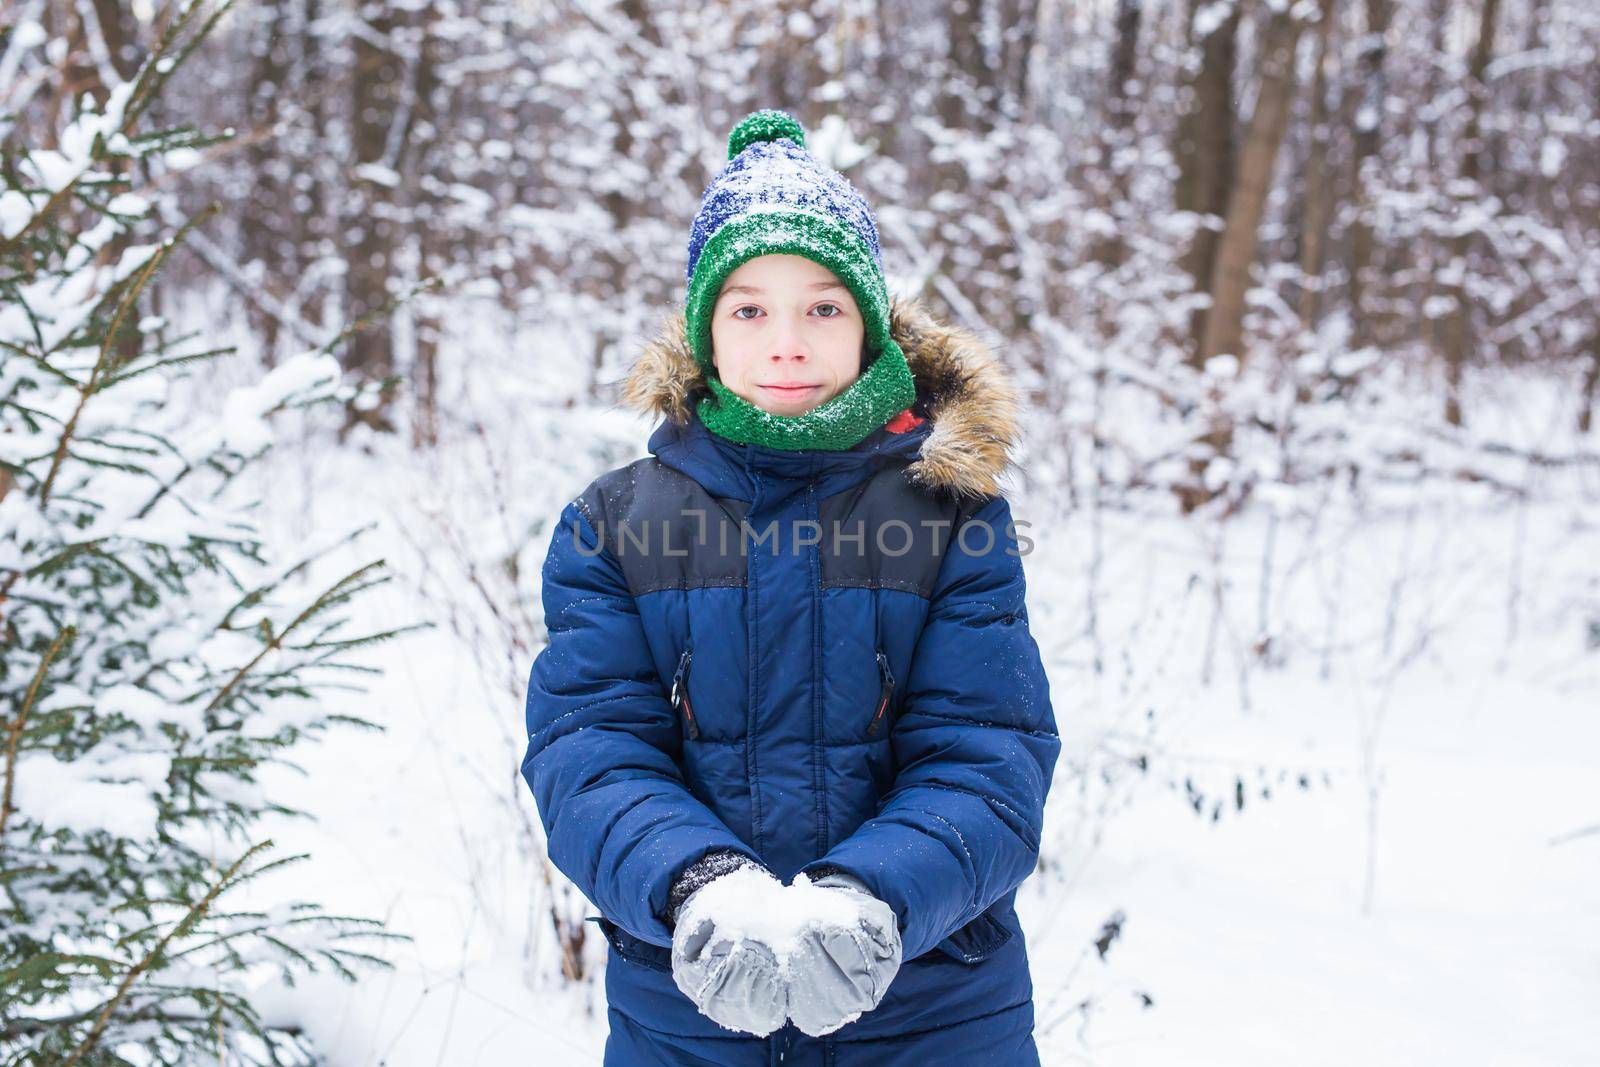 Young boy plays with snow, have fun, smiles. Teenager in winter park. Active lifestyle, winter activity, outdoor winter games, snowballs.